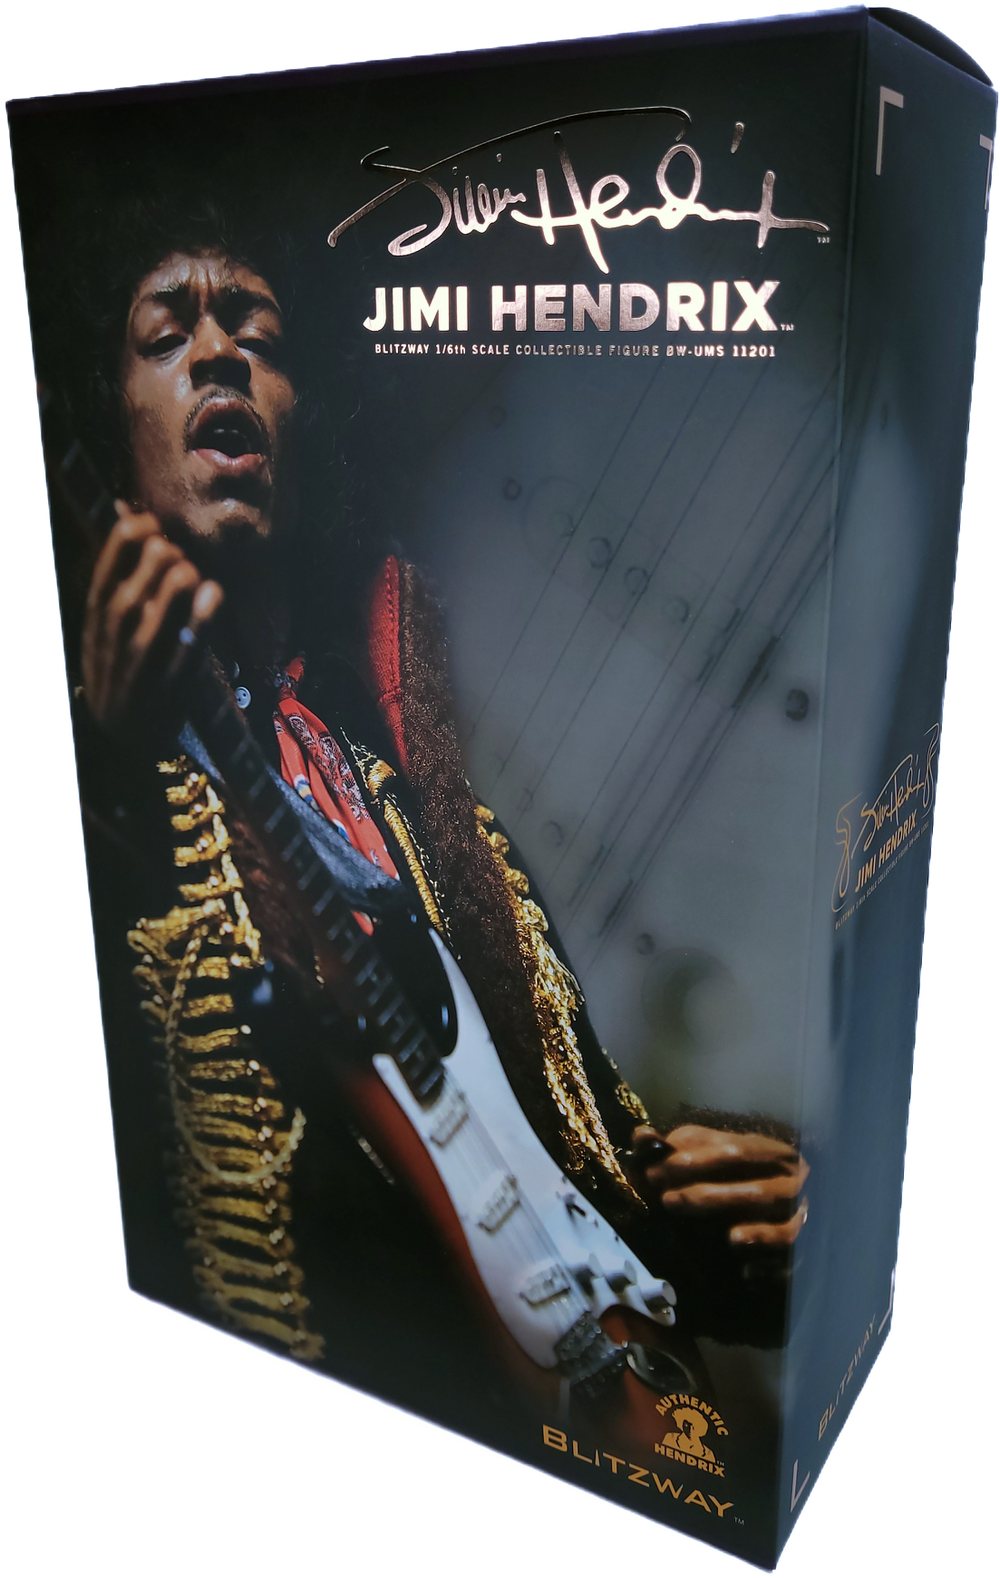 OPENED ITEM: Jimi Hendrix Collectible 2020 Blitzway Premium UMS 1/6th Scale Action 12" Figure